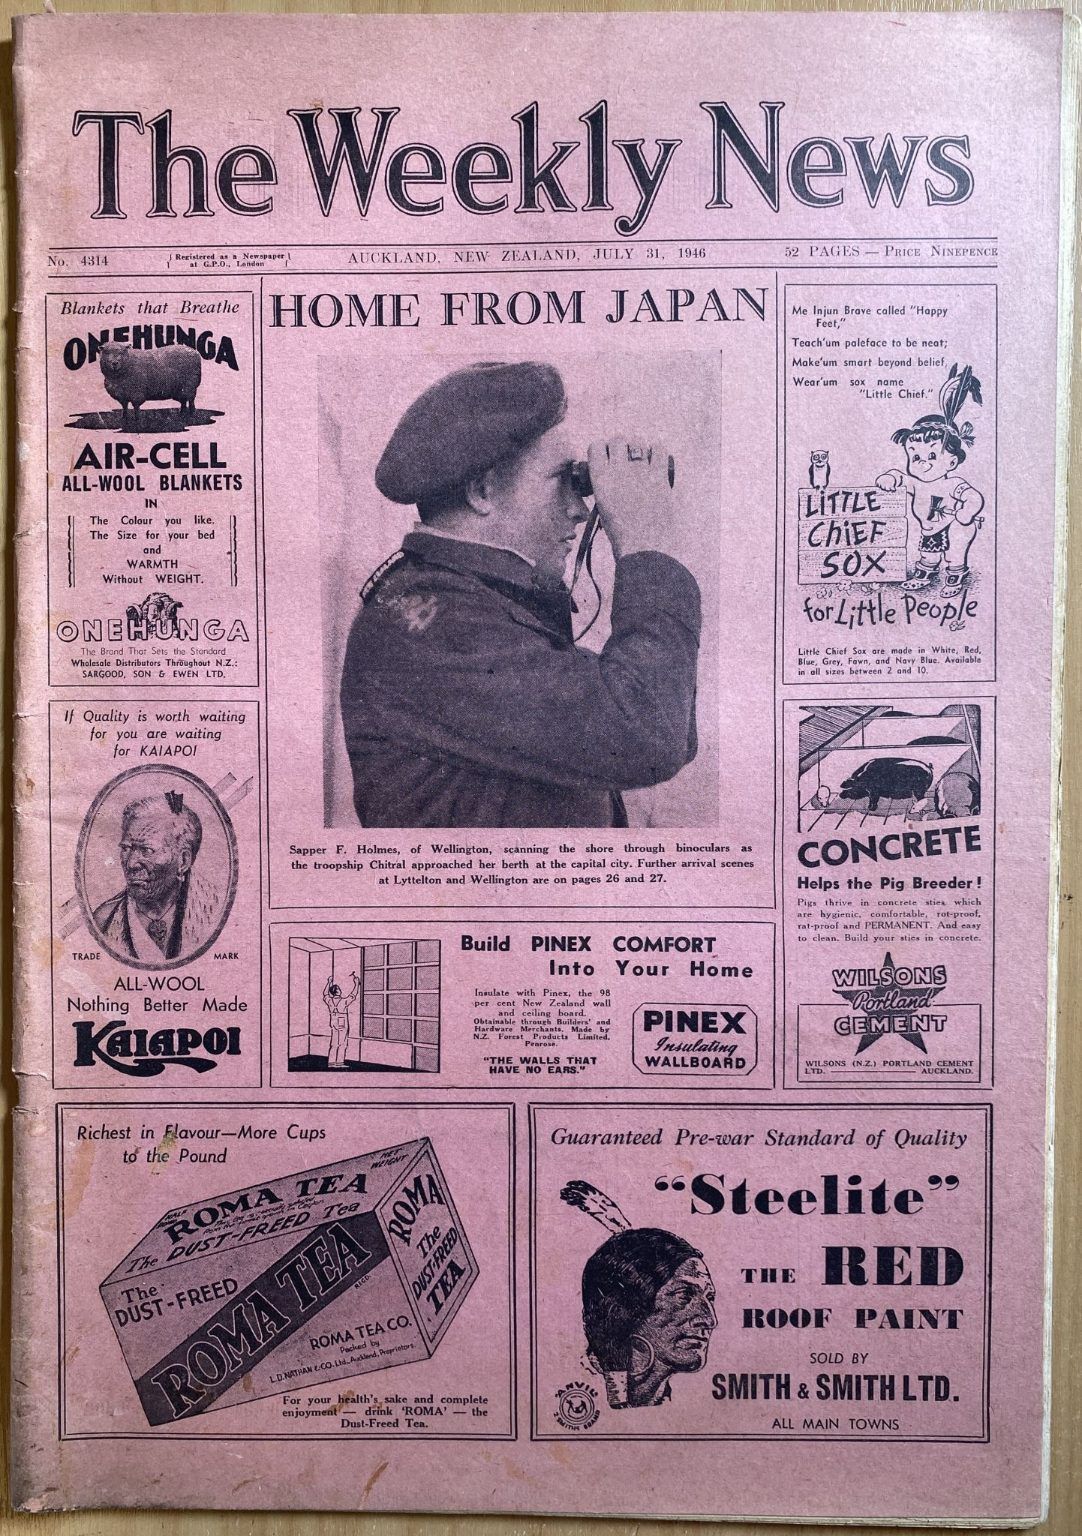 OLD NEWSPAPER: The Weekly News - No. 4314, 31 July 1946